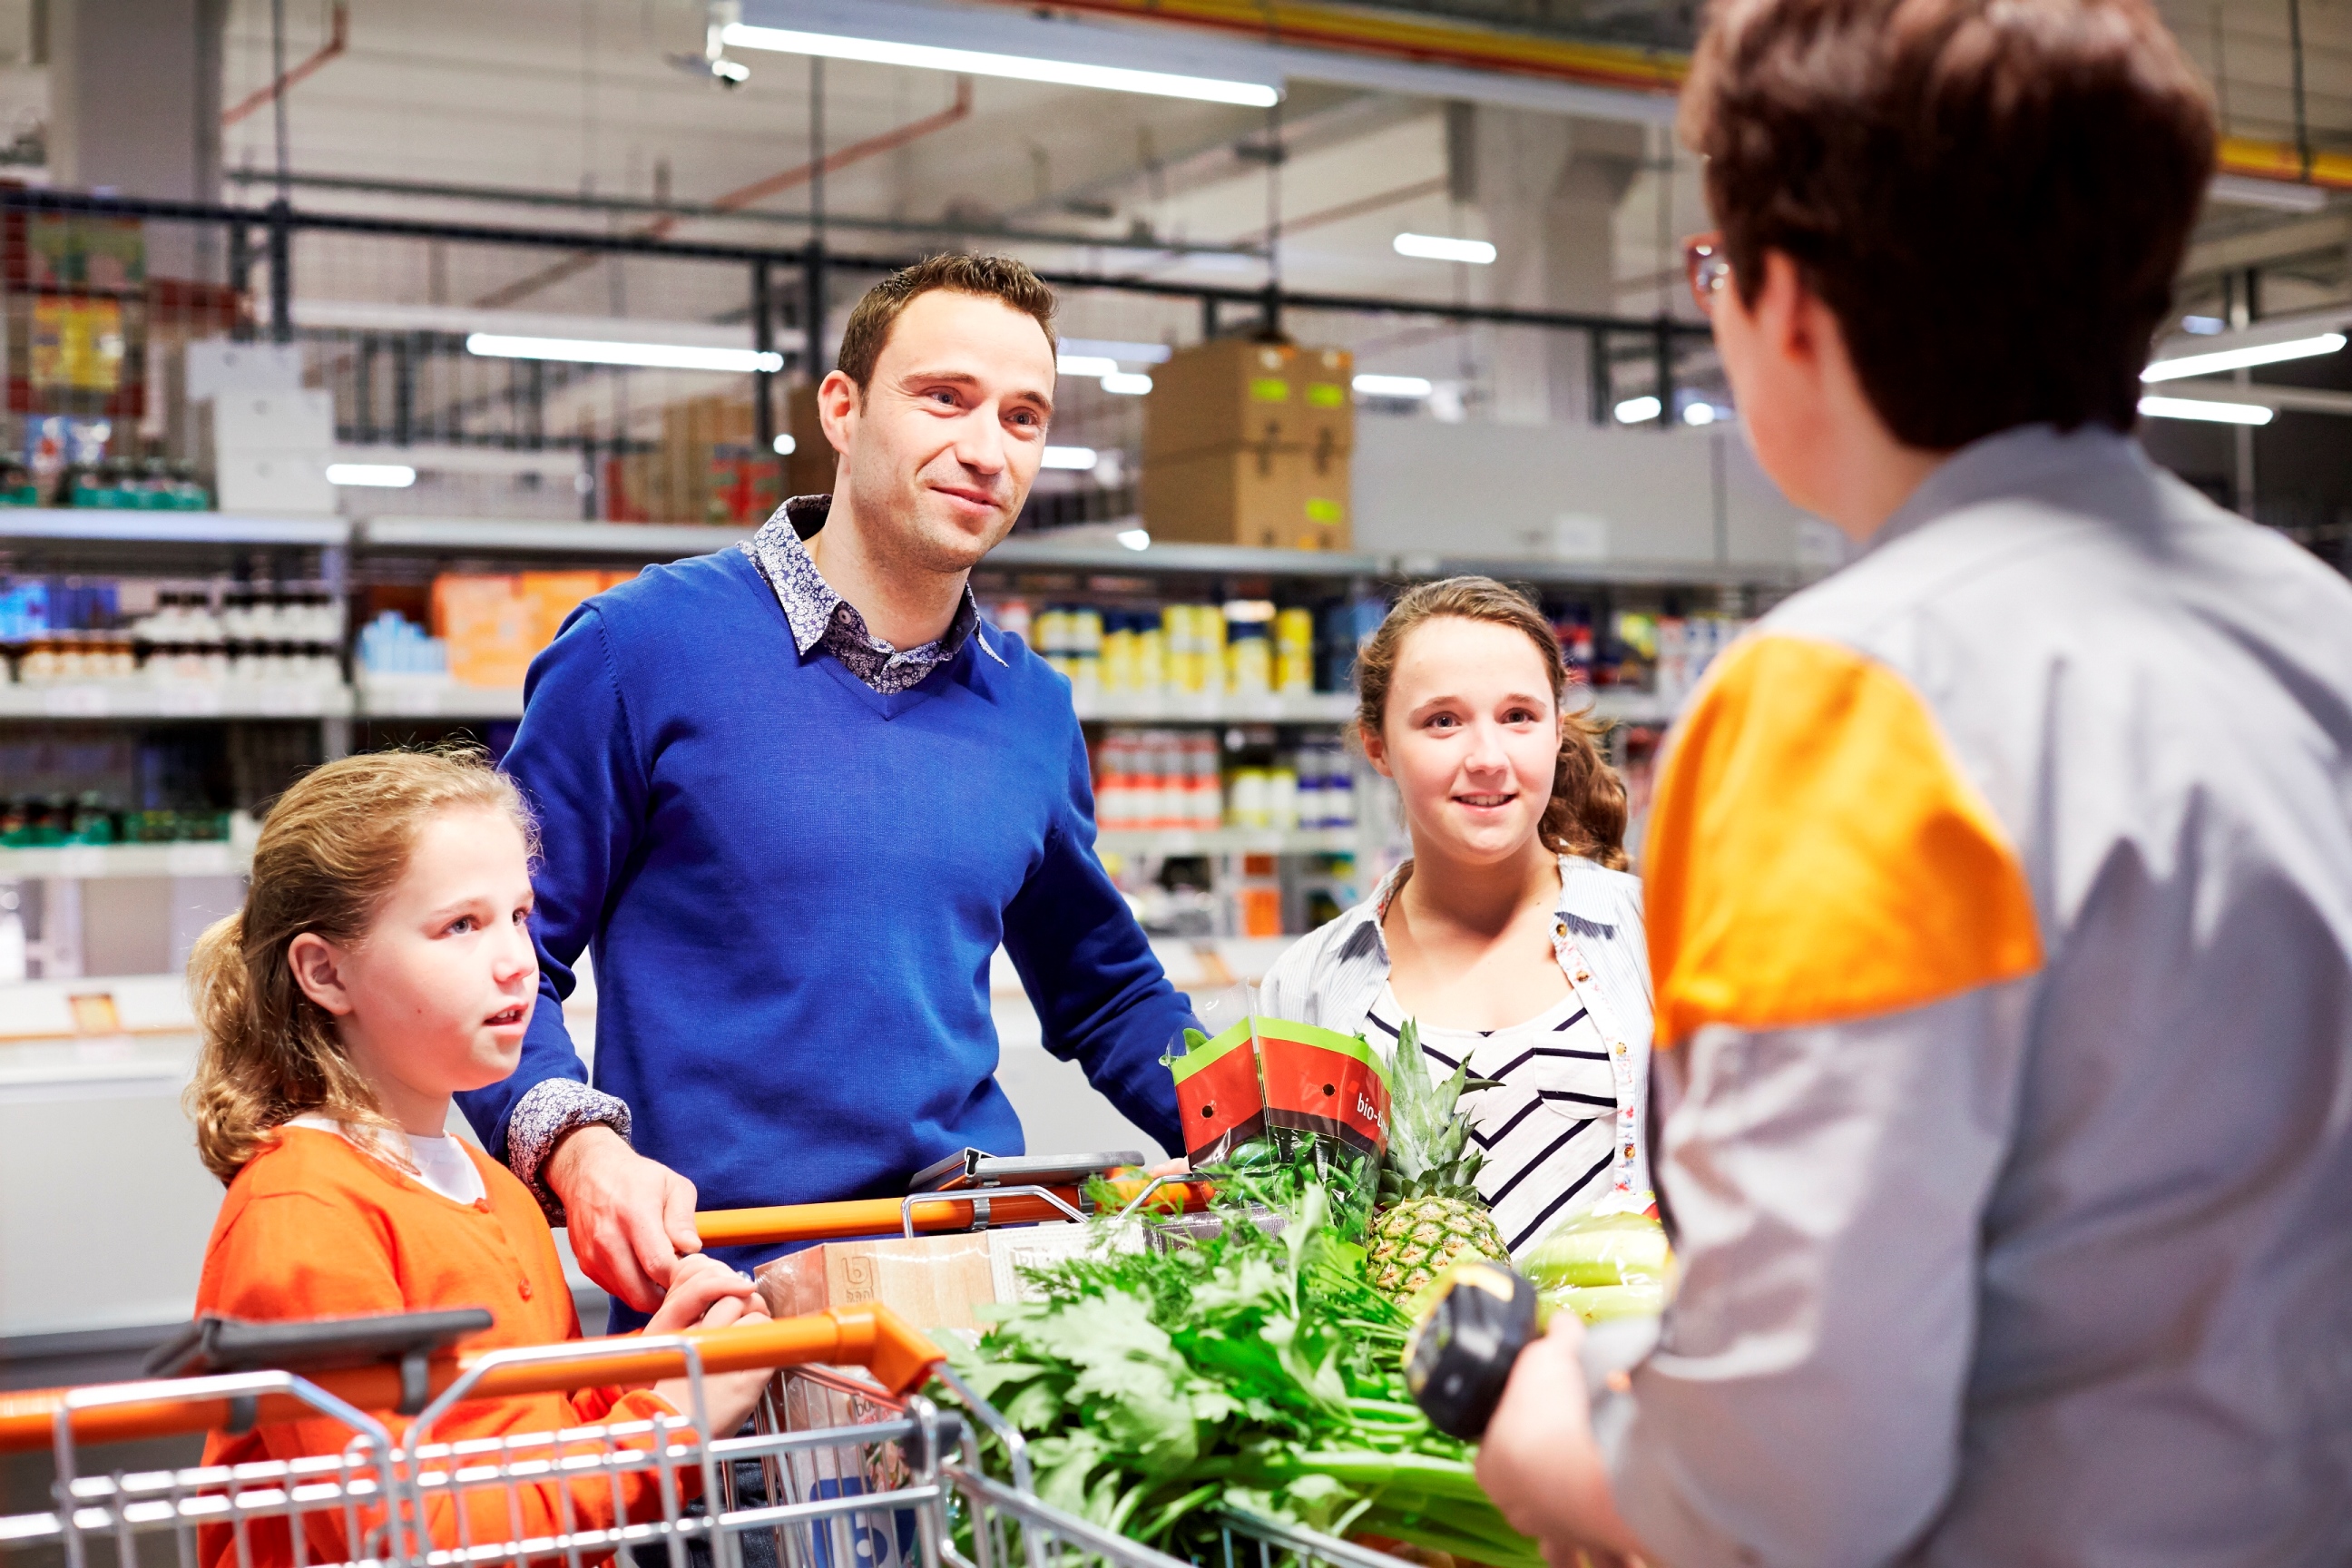 Mobile payments introduced in all Colruyt supermarkets | The Bulletin